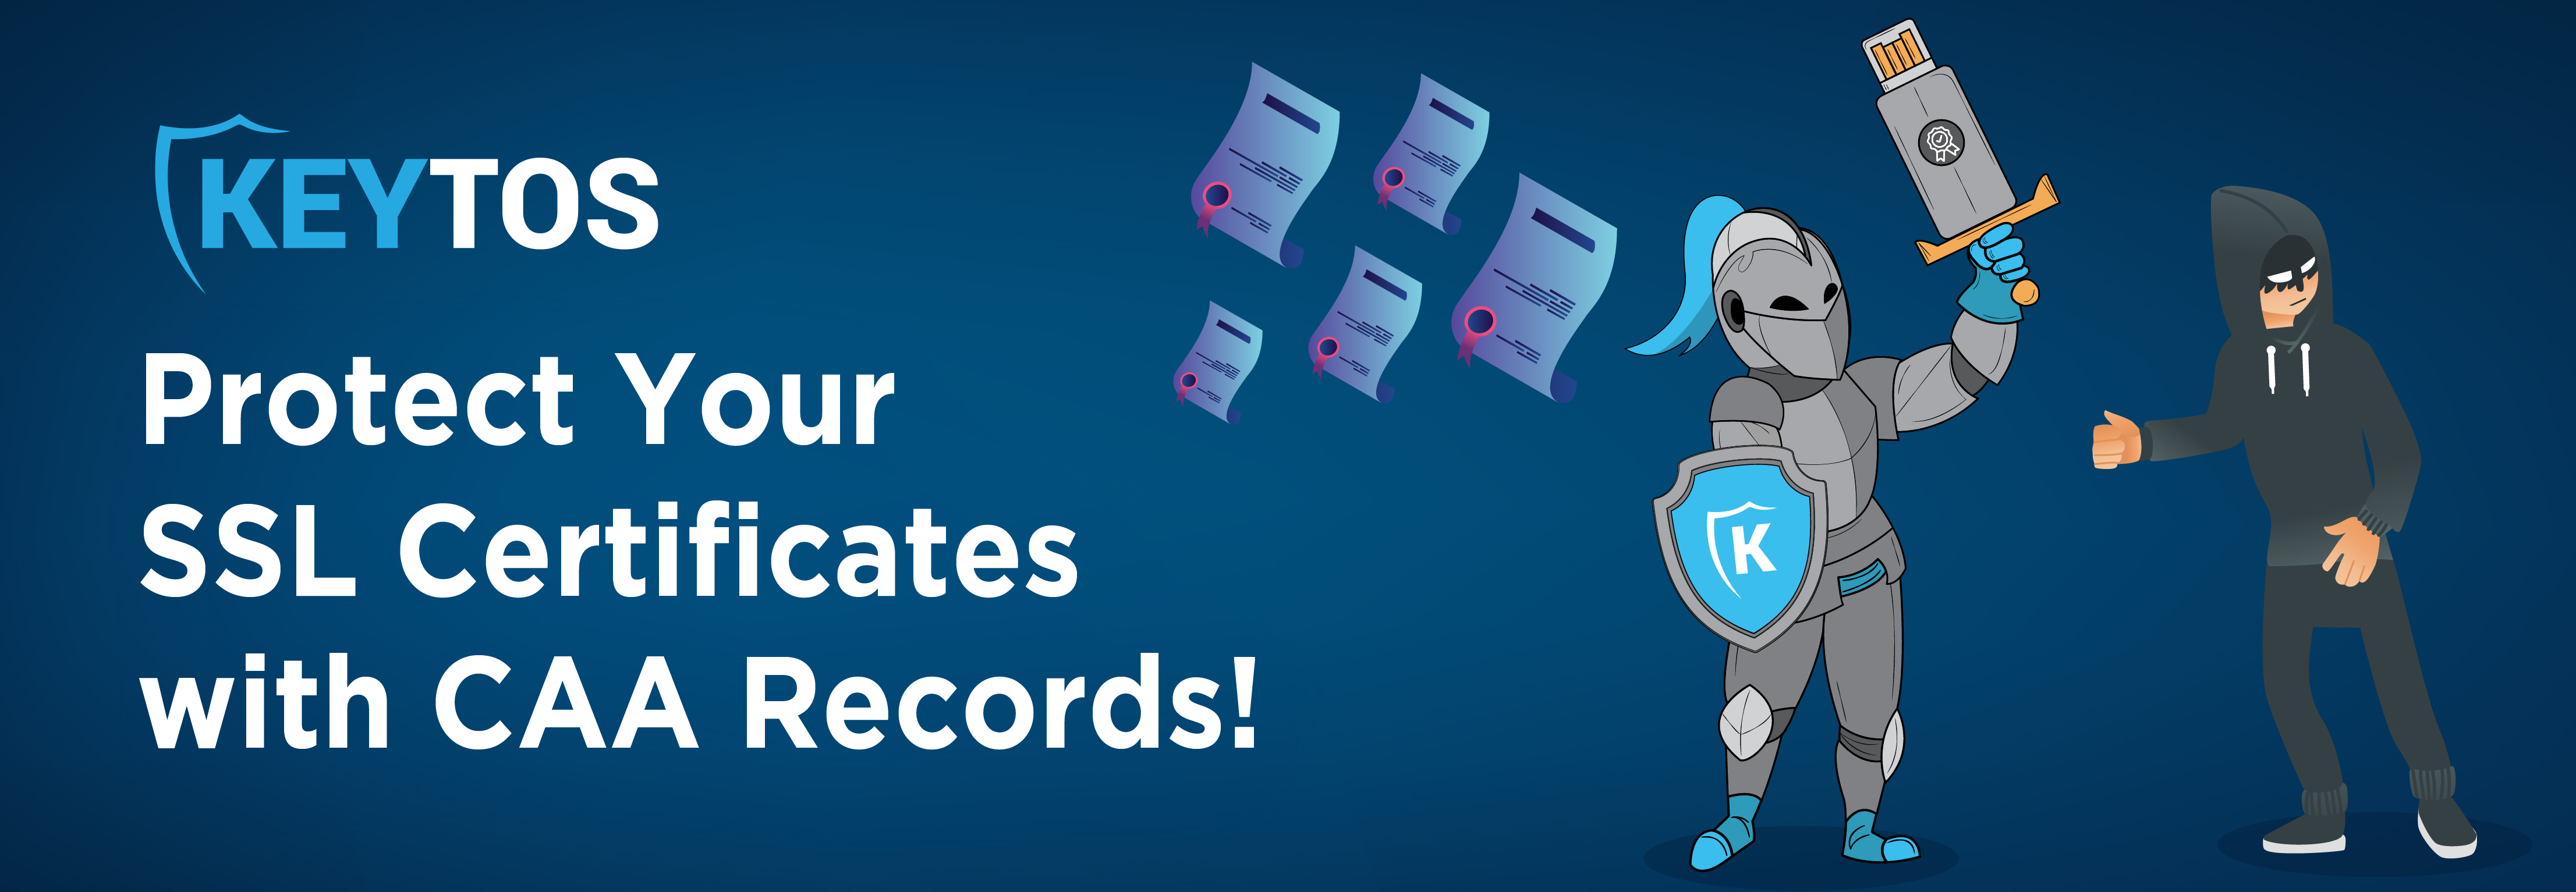 Use CAA Records to Protect Your SSL Certificates